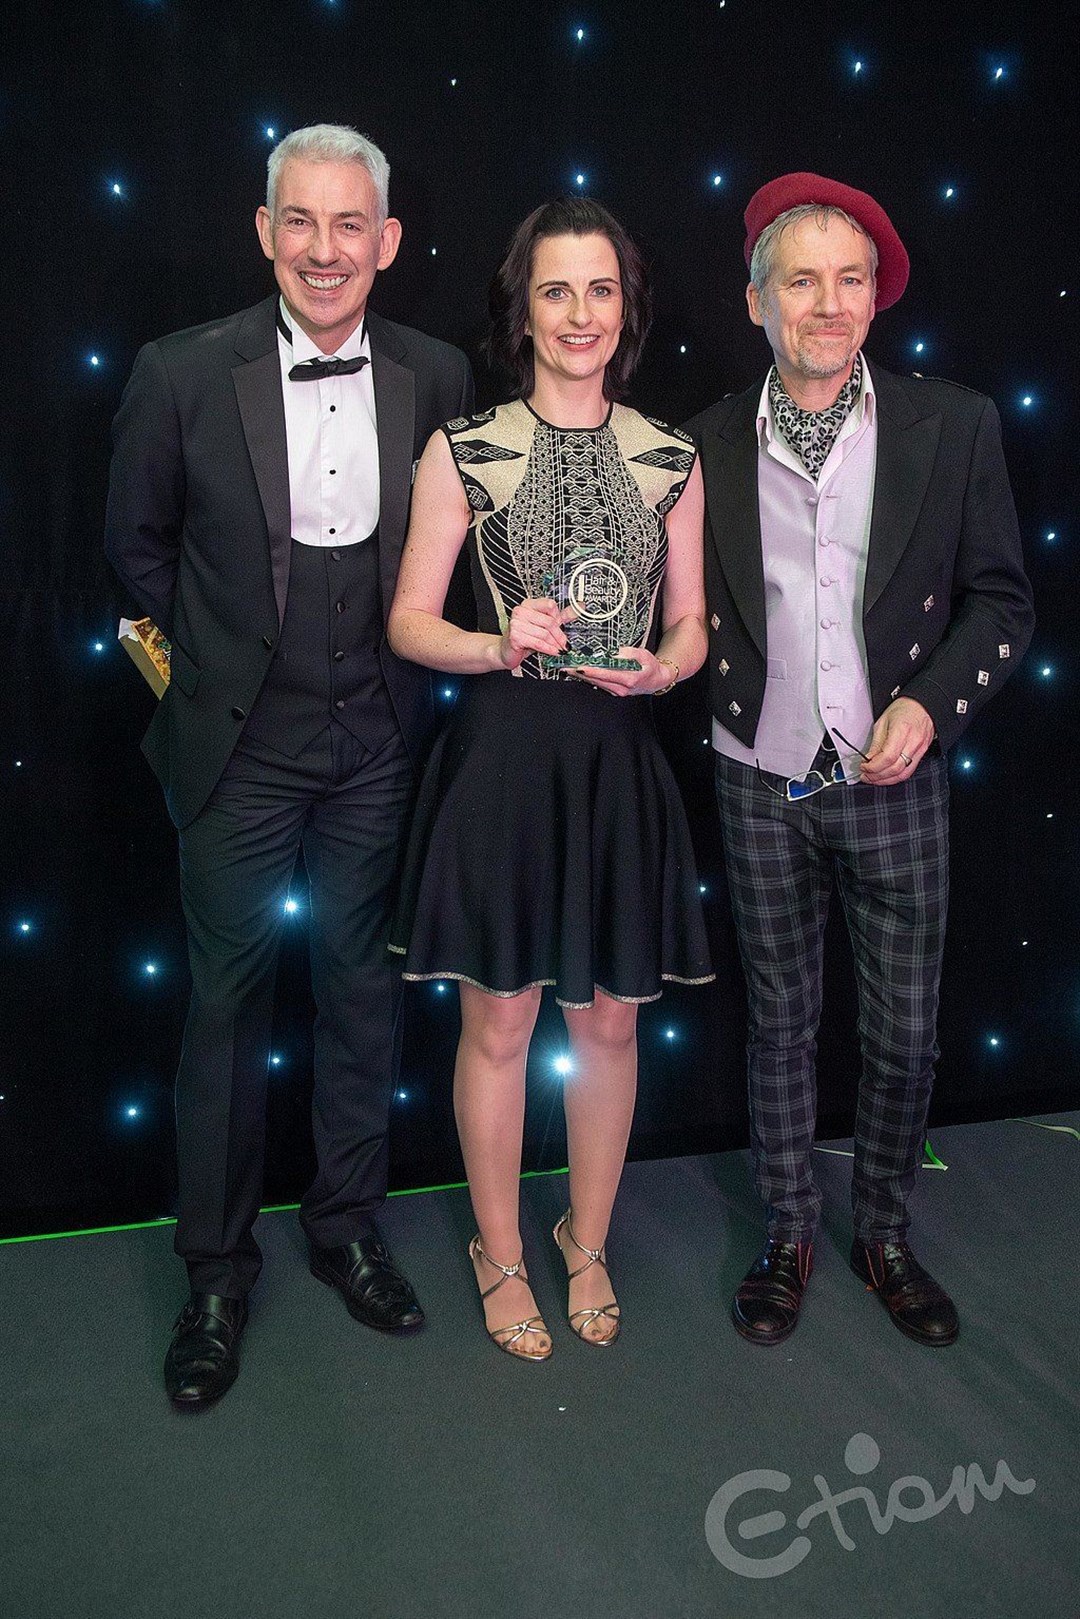 Kerry McKay, of Fochabers, receives the North East Health and Beauty Award for Best Complementary Therapist. Picture by Abermedia / Michal Wachucik.